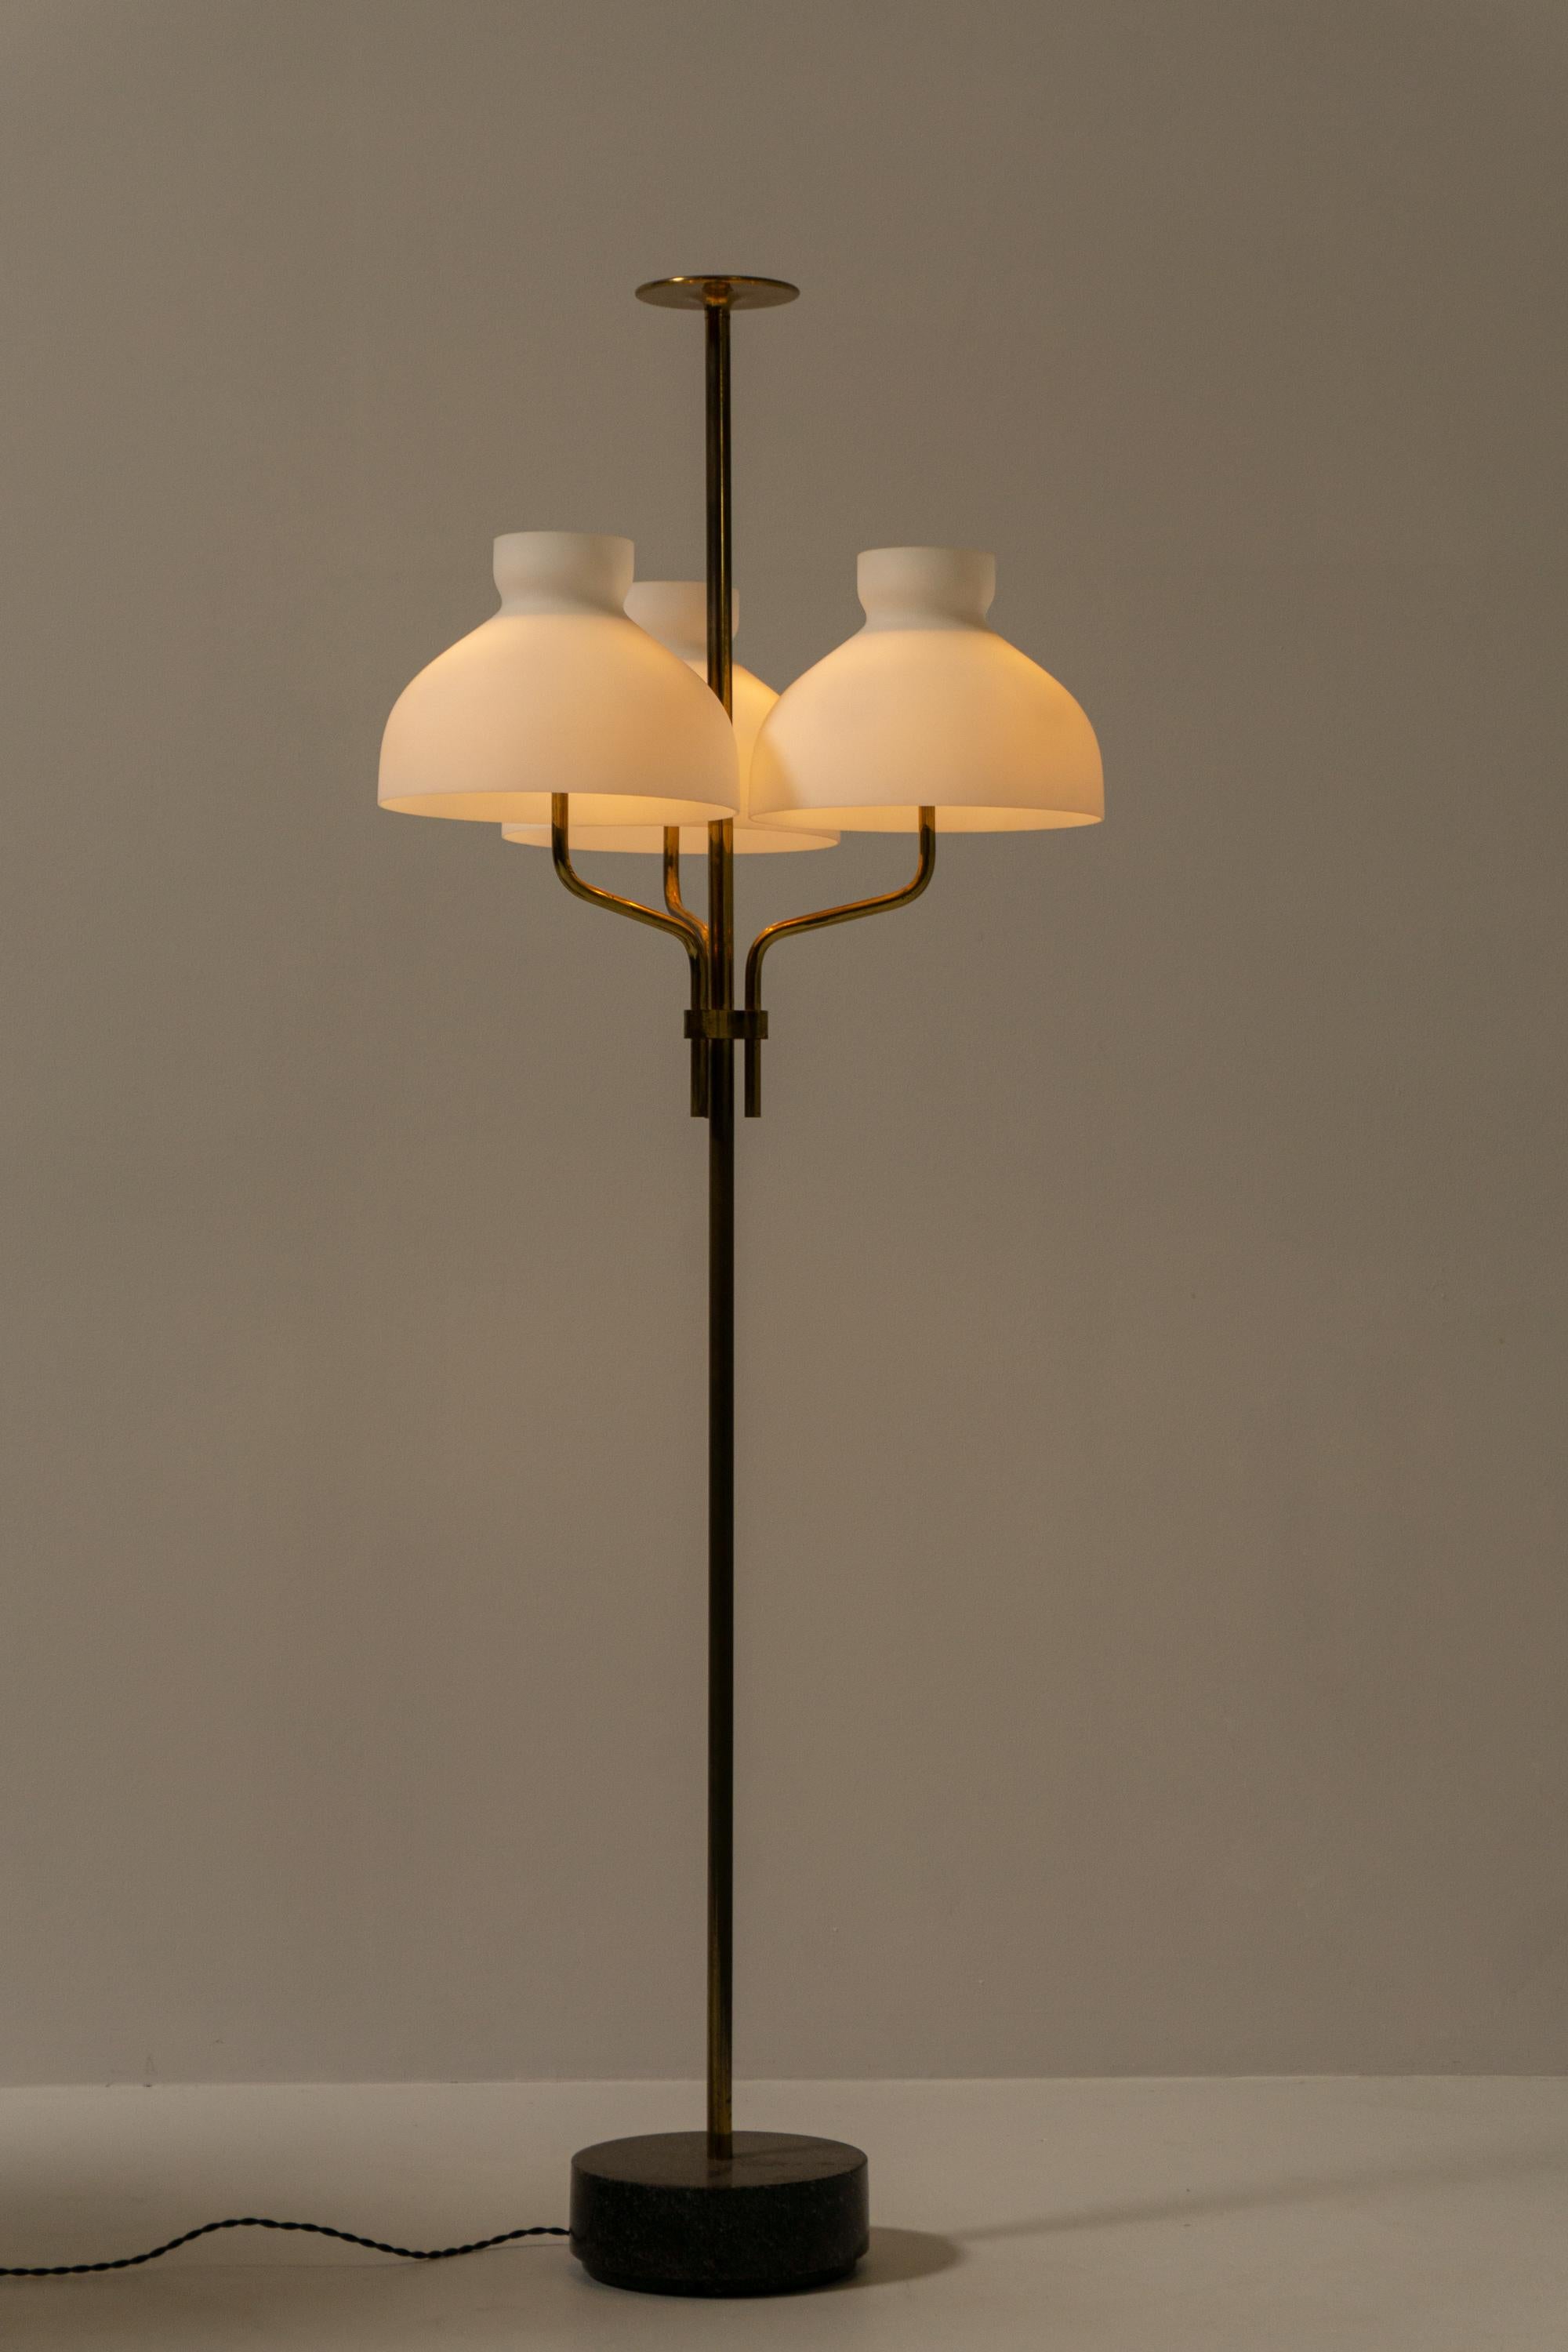 This elegant floor lamp, designed by Ignazio Gardella in 1956, consists of a brass stem held by a marble base and three glass elements for lighting. The saucer glass is mouth blown and satin finish.
The three curved lampshades give the lamp an